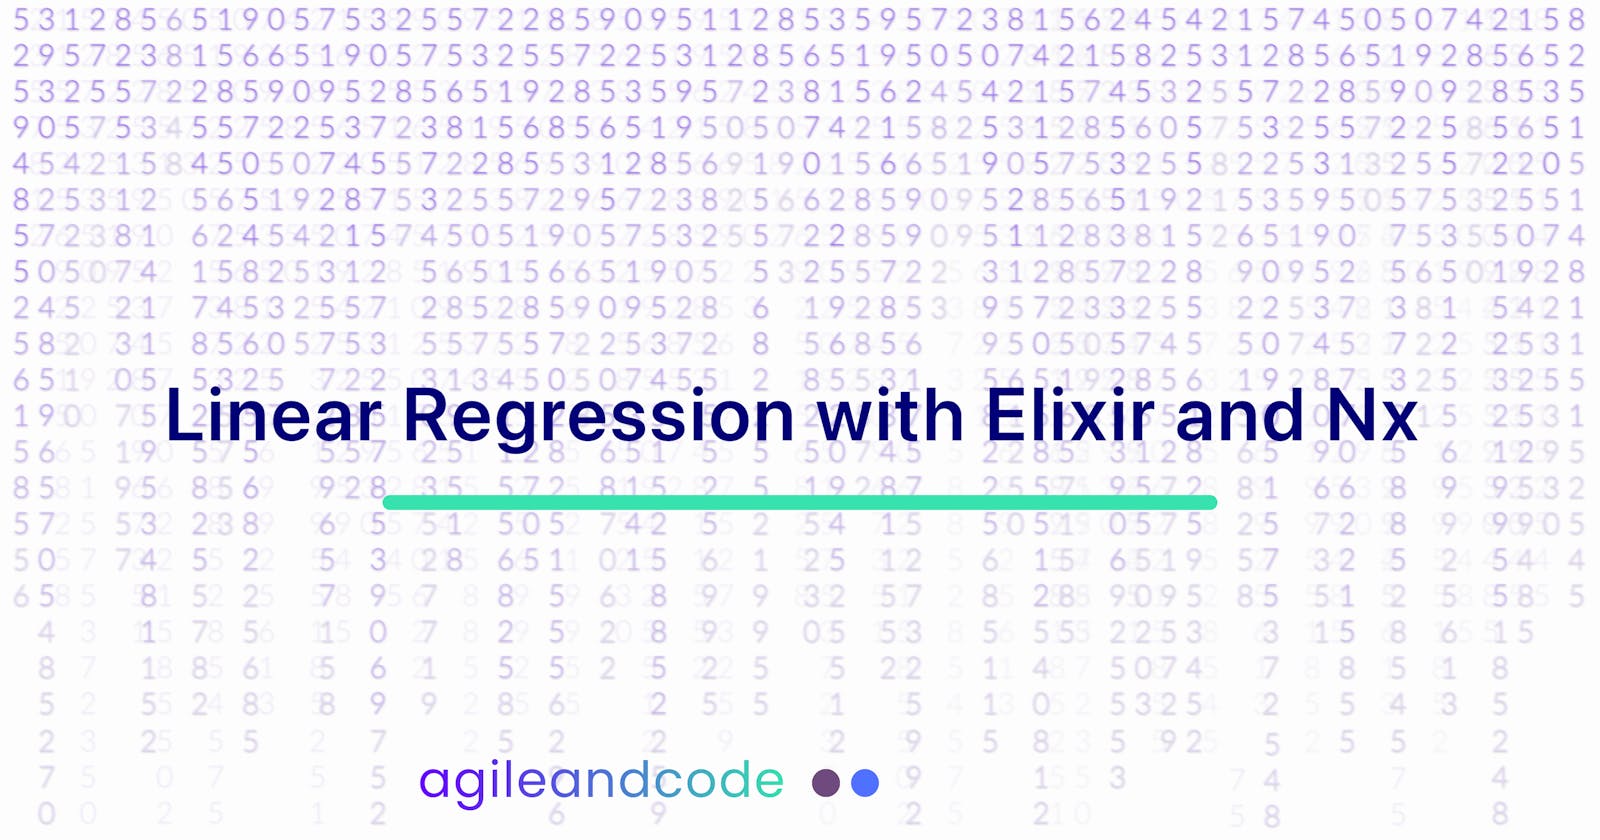 Linear Regression with Elixir and Nx